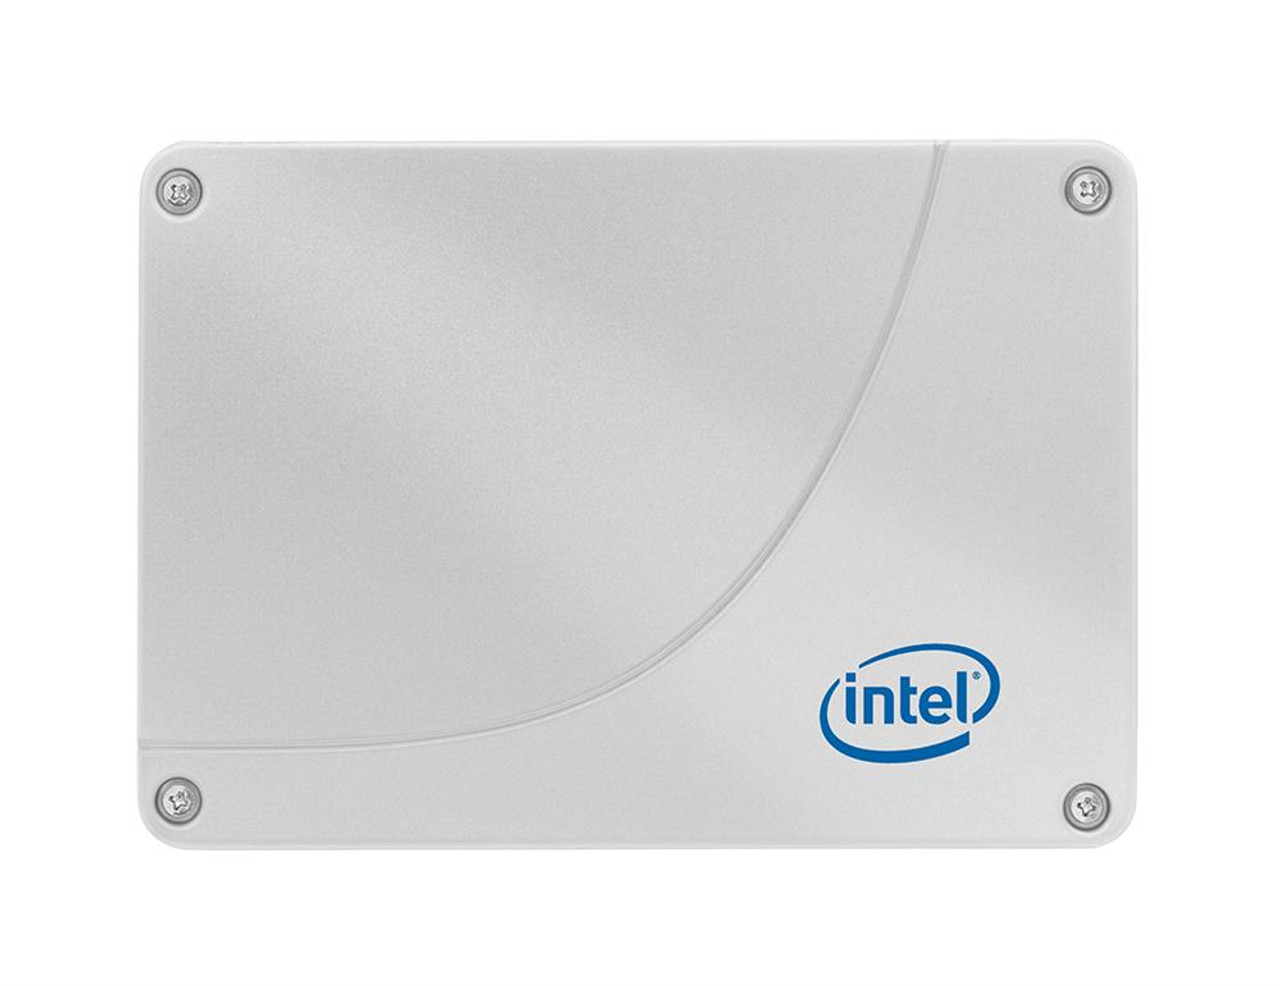 1356235 Intel 520 Series 240GB MLC SATA 6Gbps (AES-128) 2.5-inch Internal Solid State Drive (SSD)